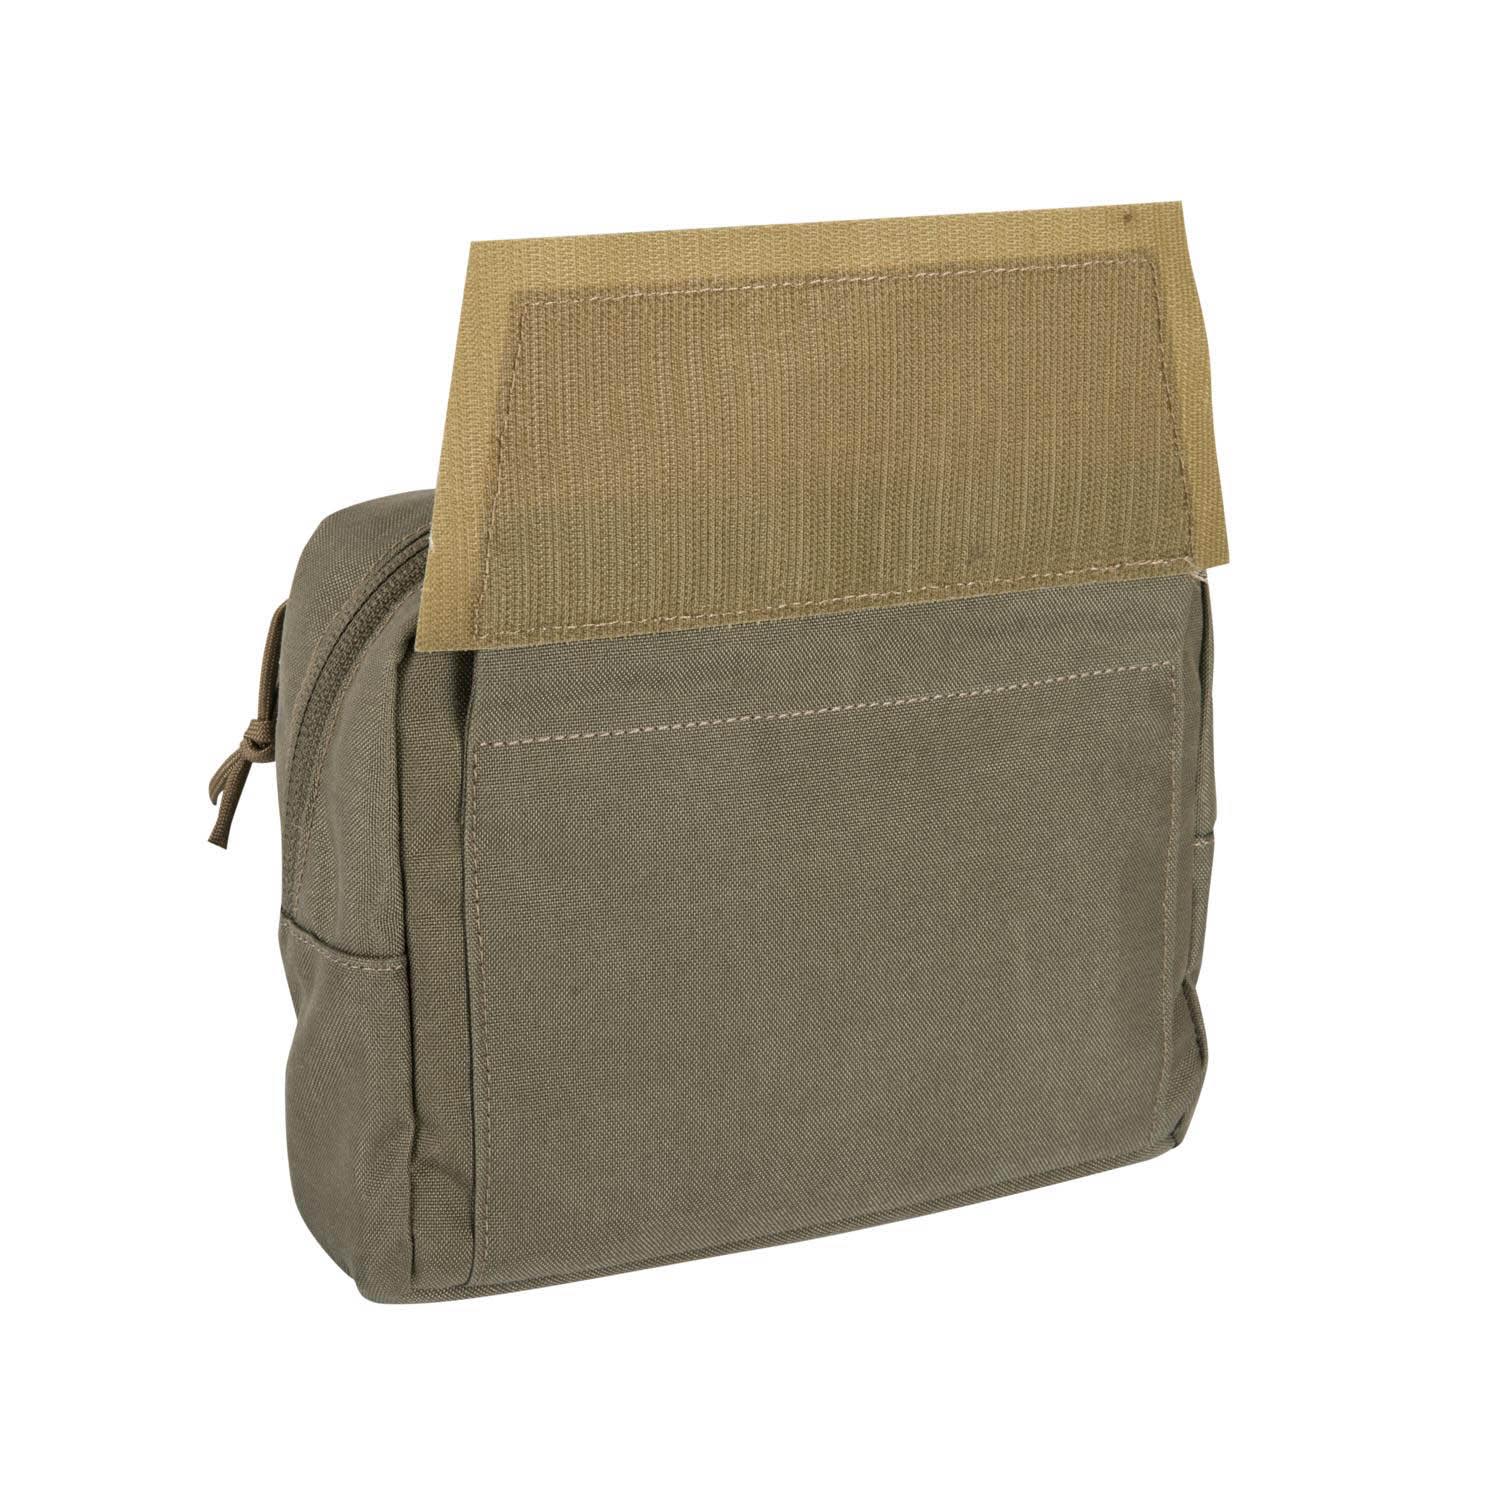 Direct Action Spitfire MK II Underpouch coyote brown